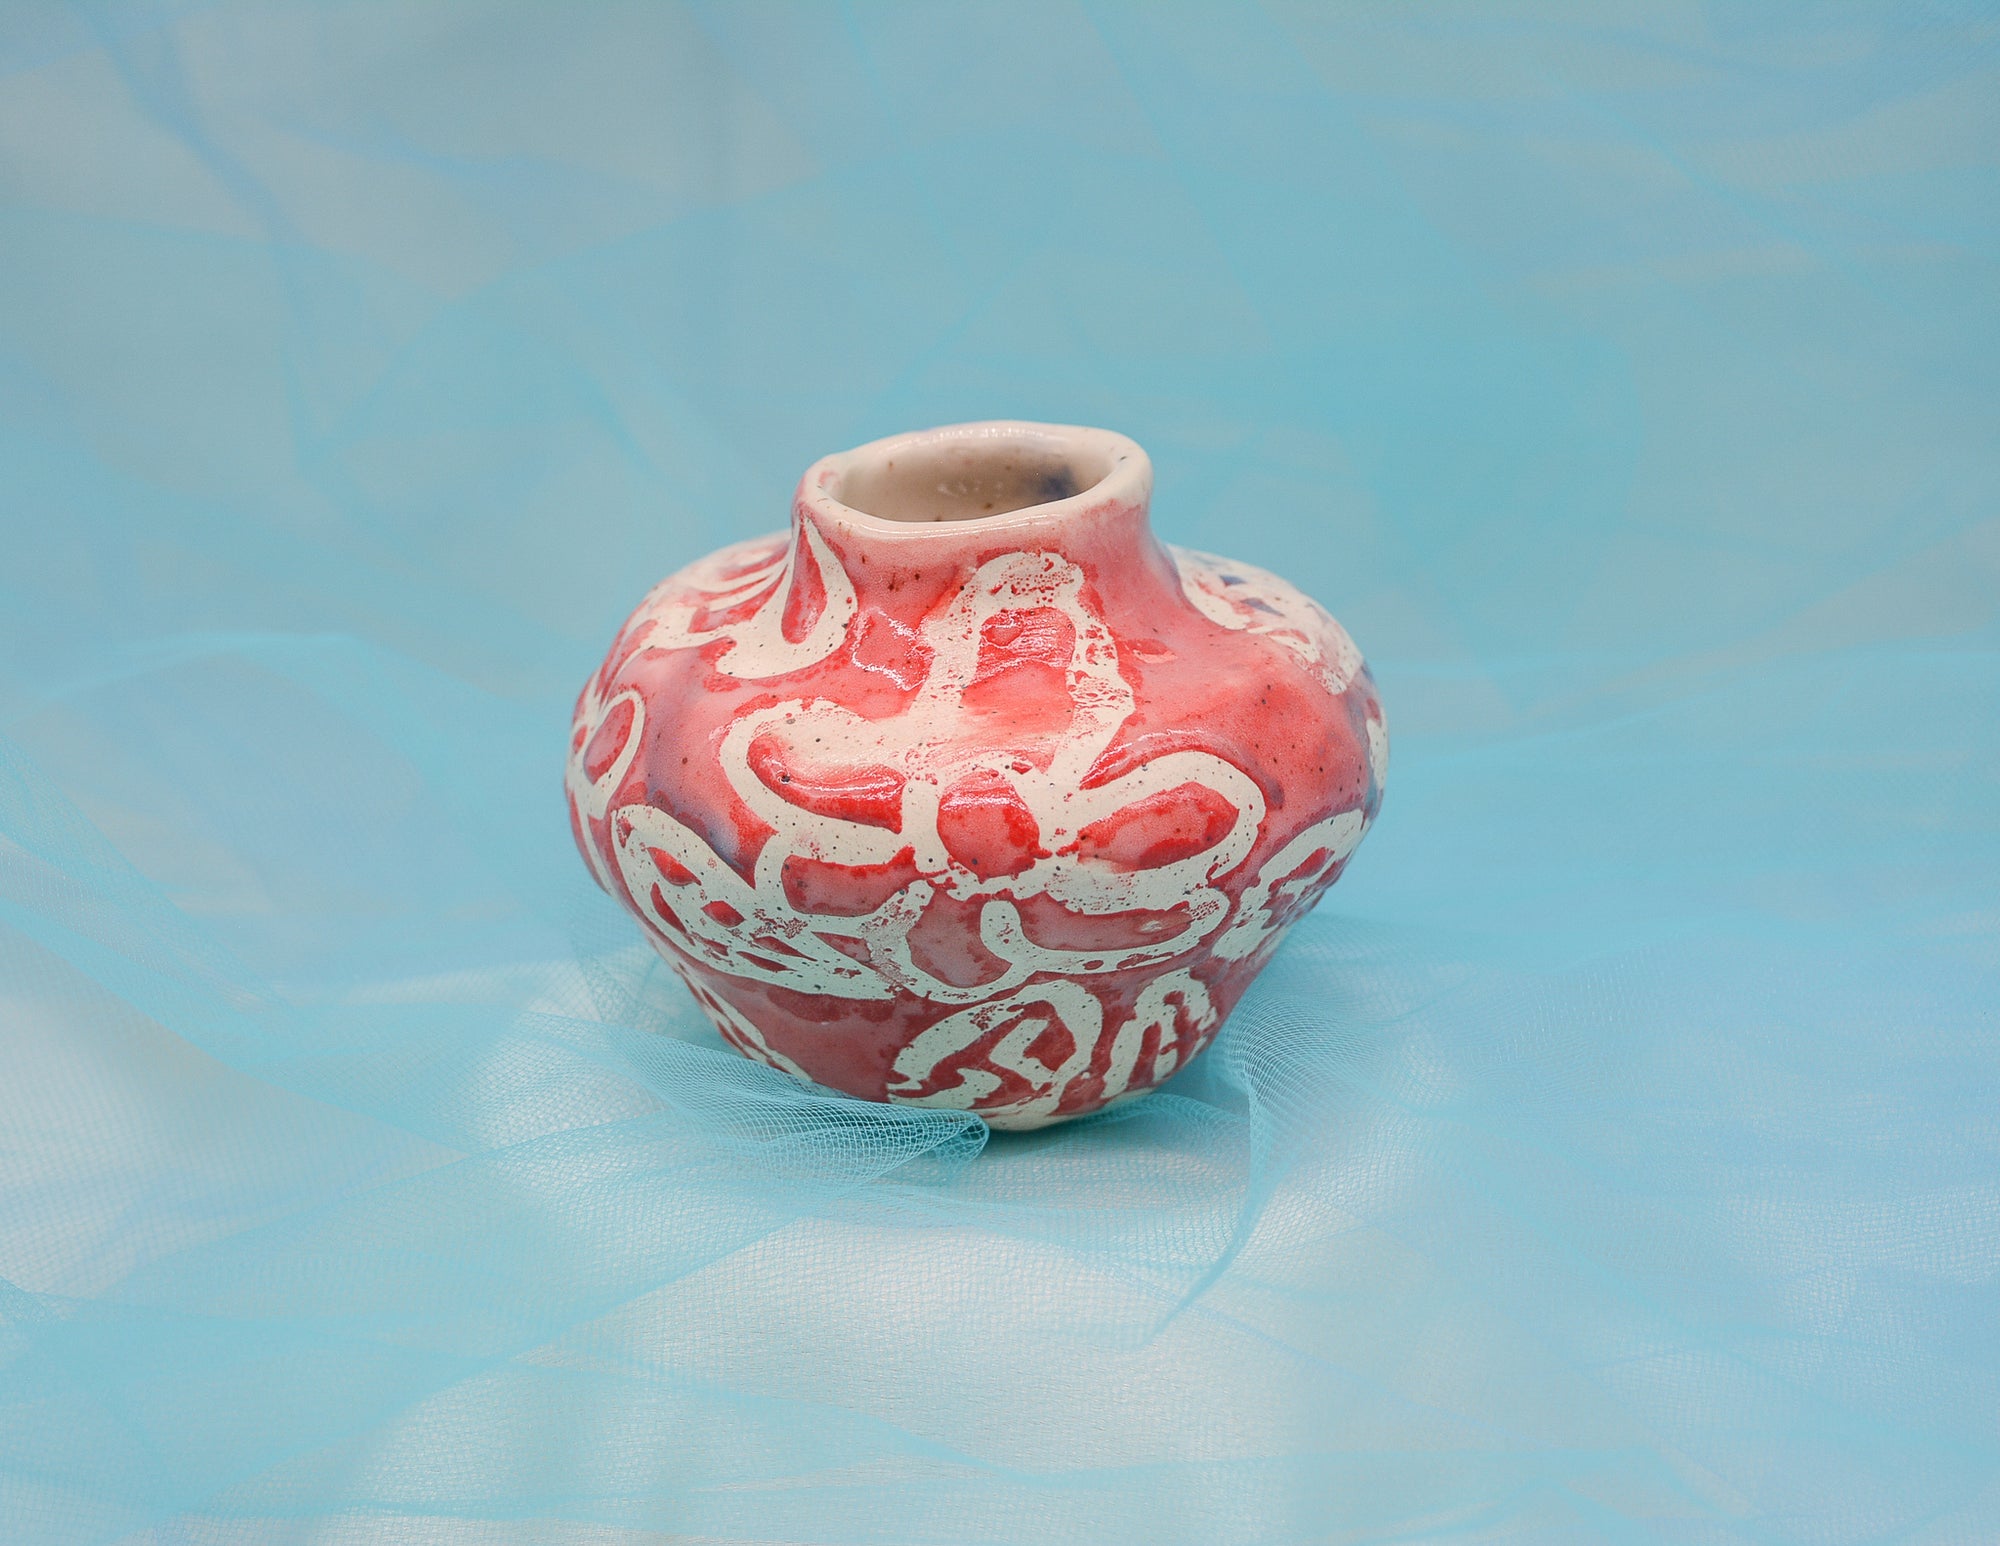 Small Floral Vase